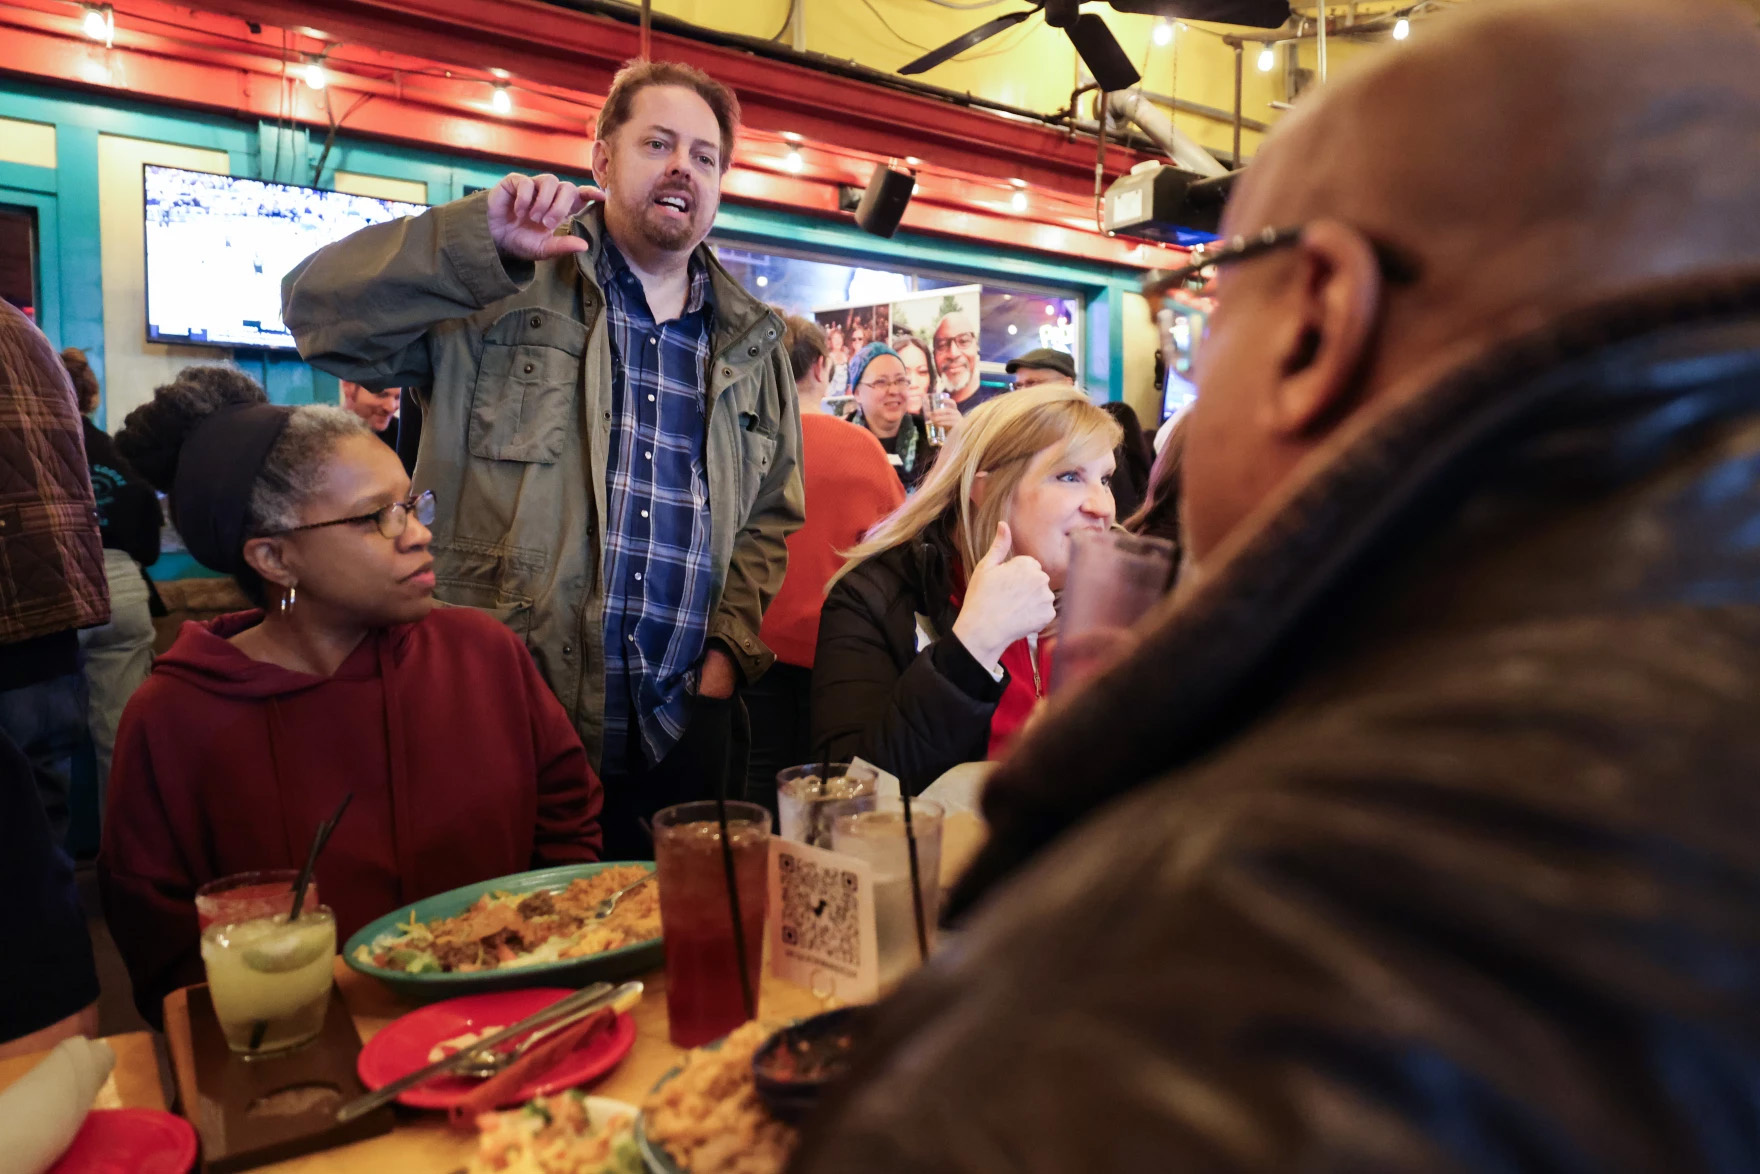 A man stands while speaking to people seated at a table. He is Jefferson Nunn.